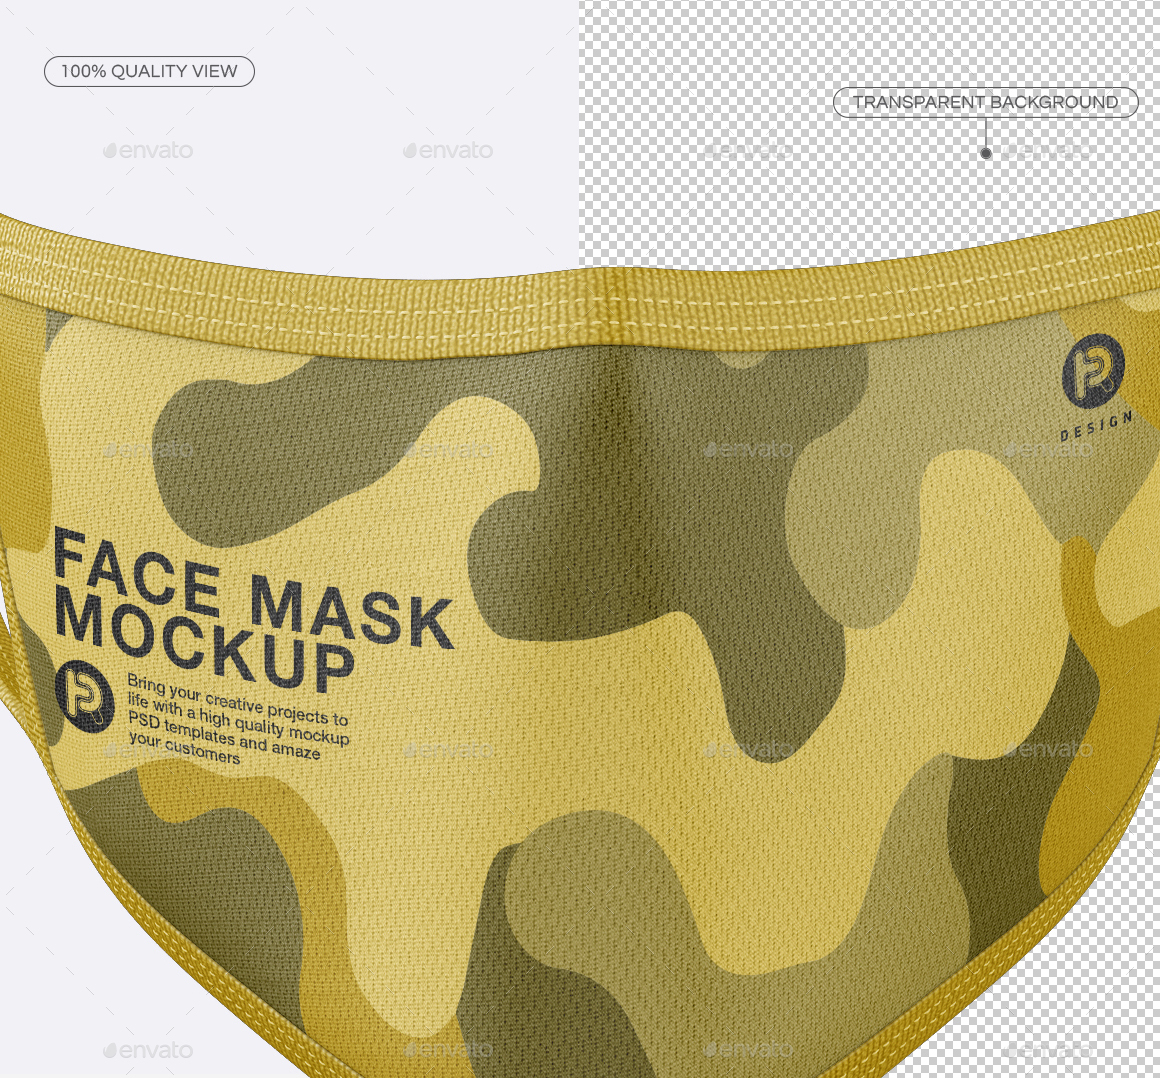 Download Face Mask Mockup By Trdesignme Graphicriver PSD Mockup Templates